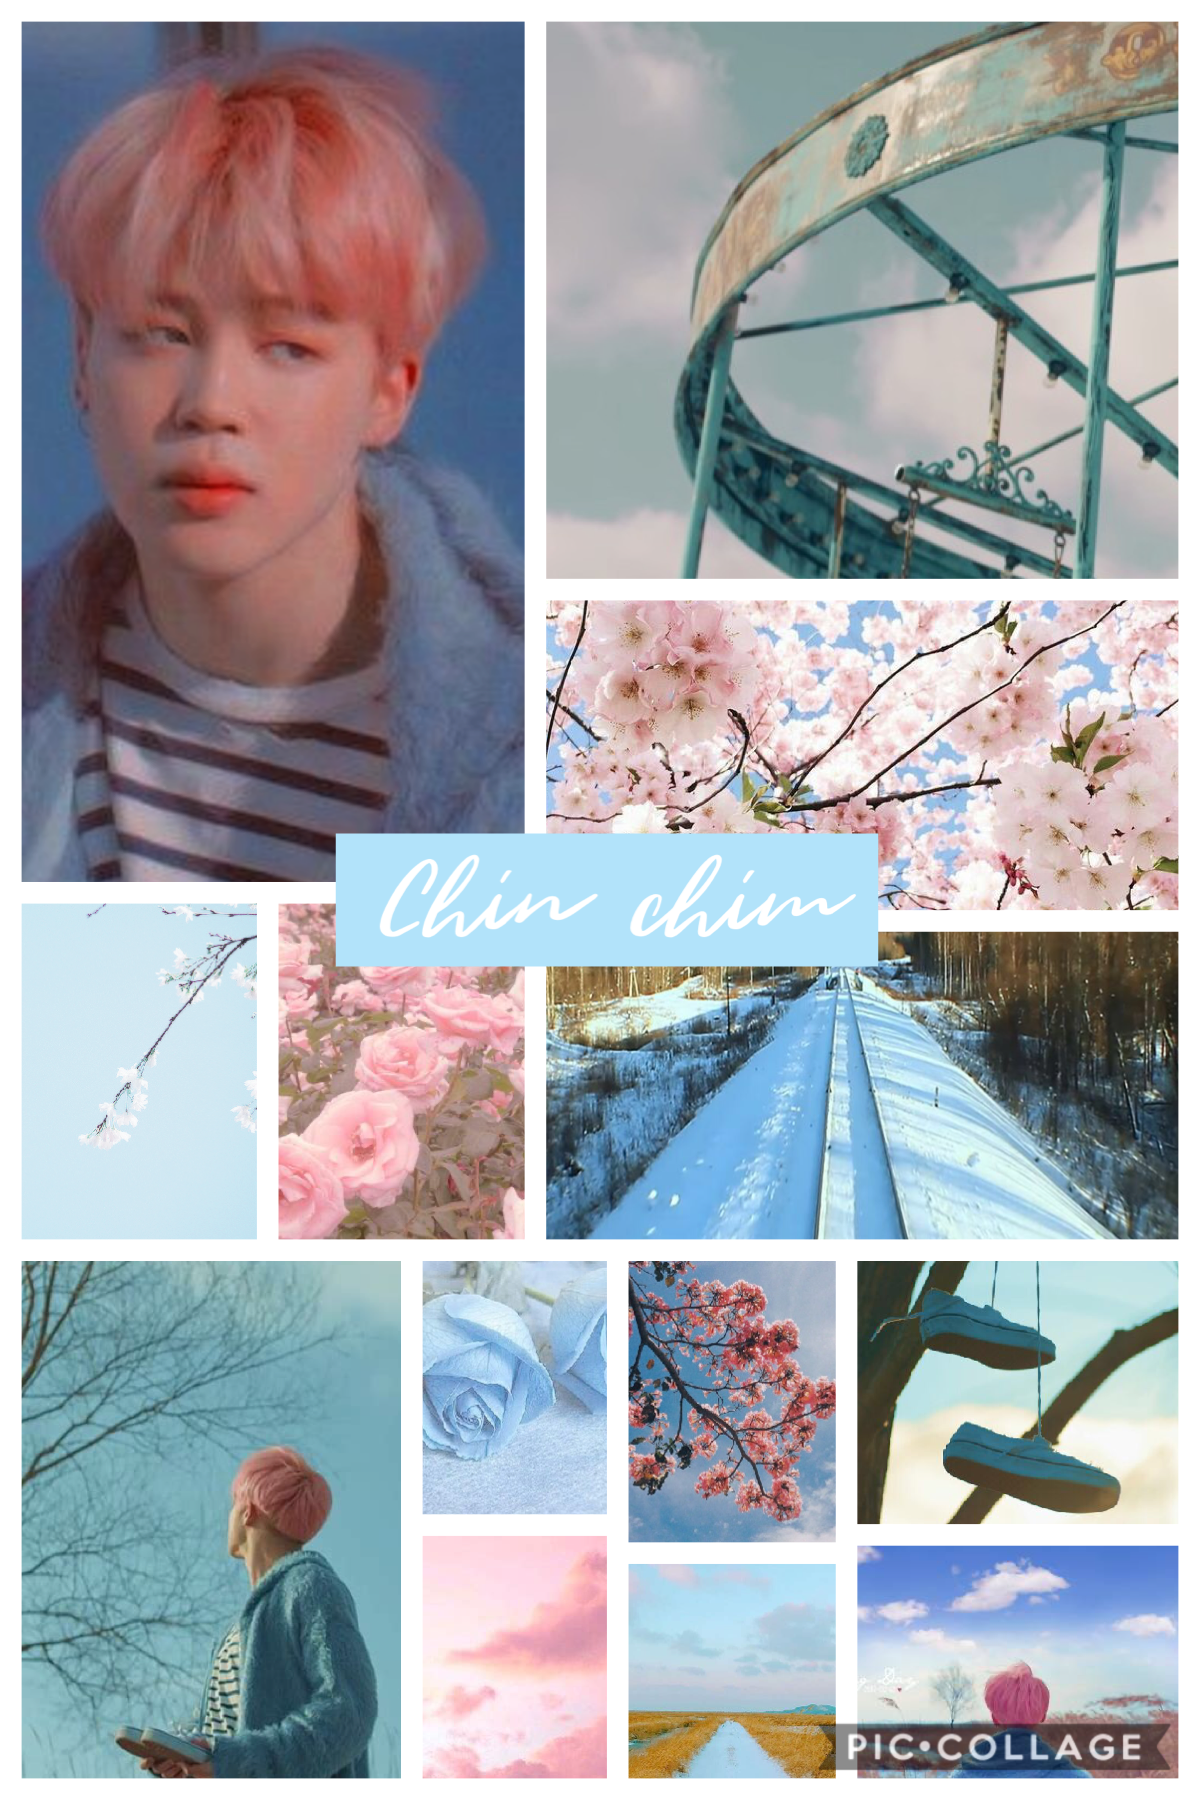 I had spring day stuck in my head and I also had one of Jimin’s weird saying so I decided to make an edit of chim chim 💖👏🏻